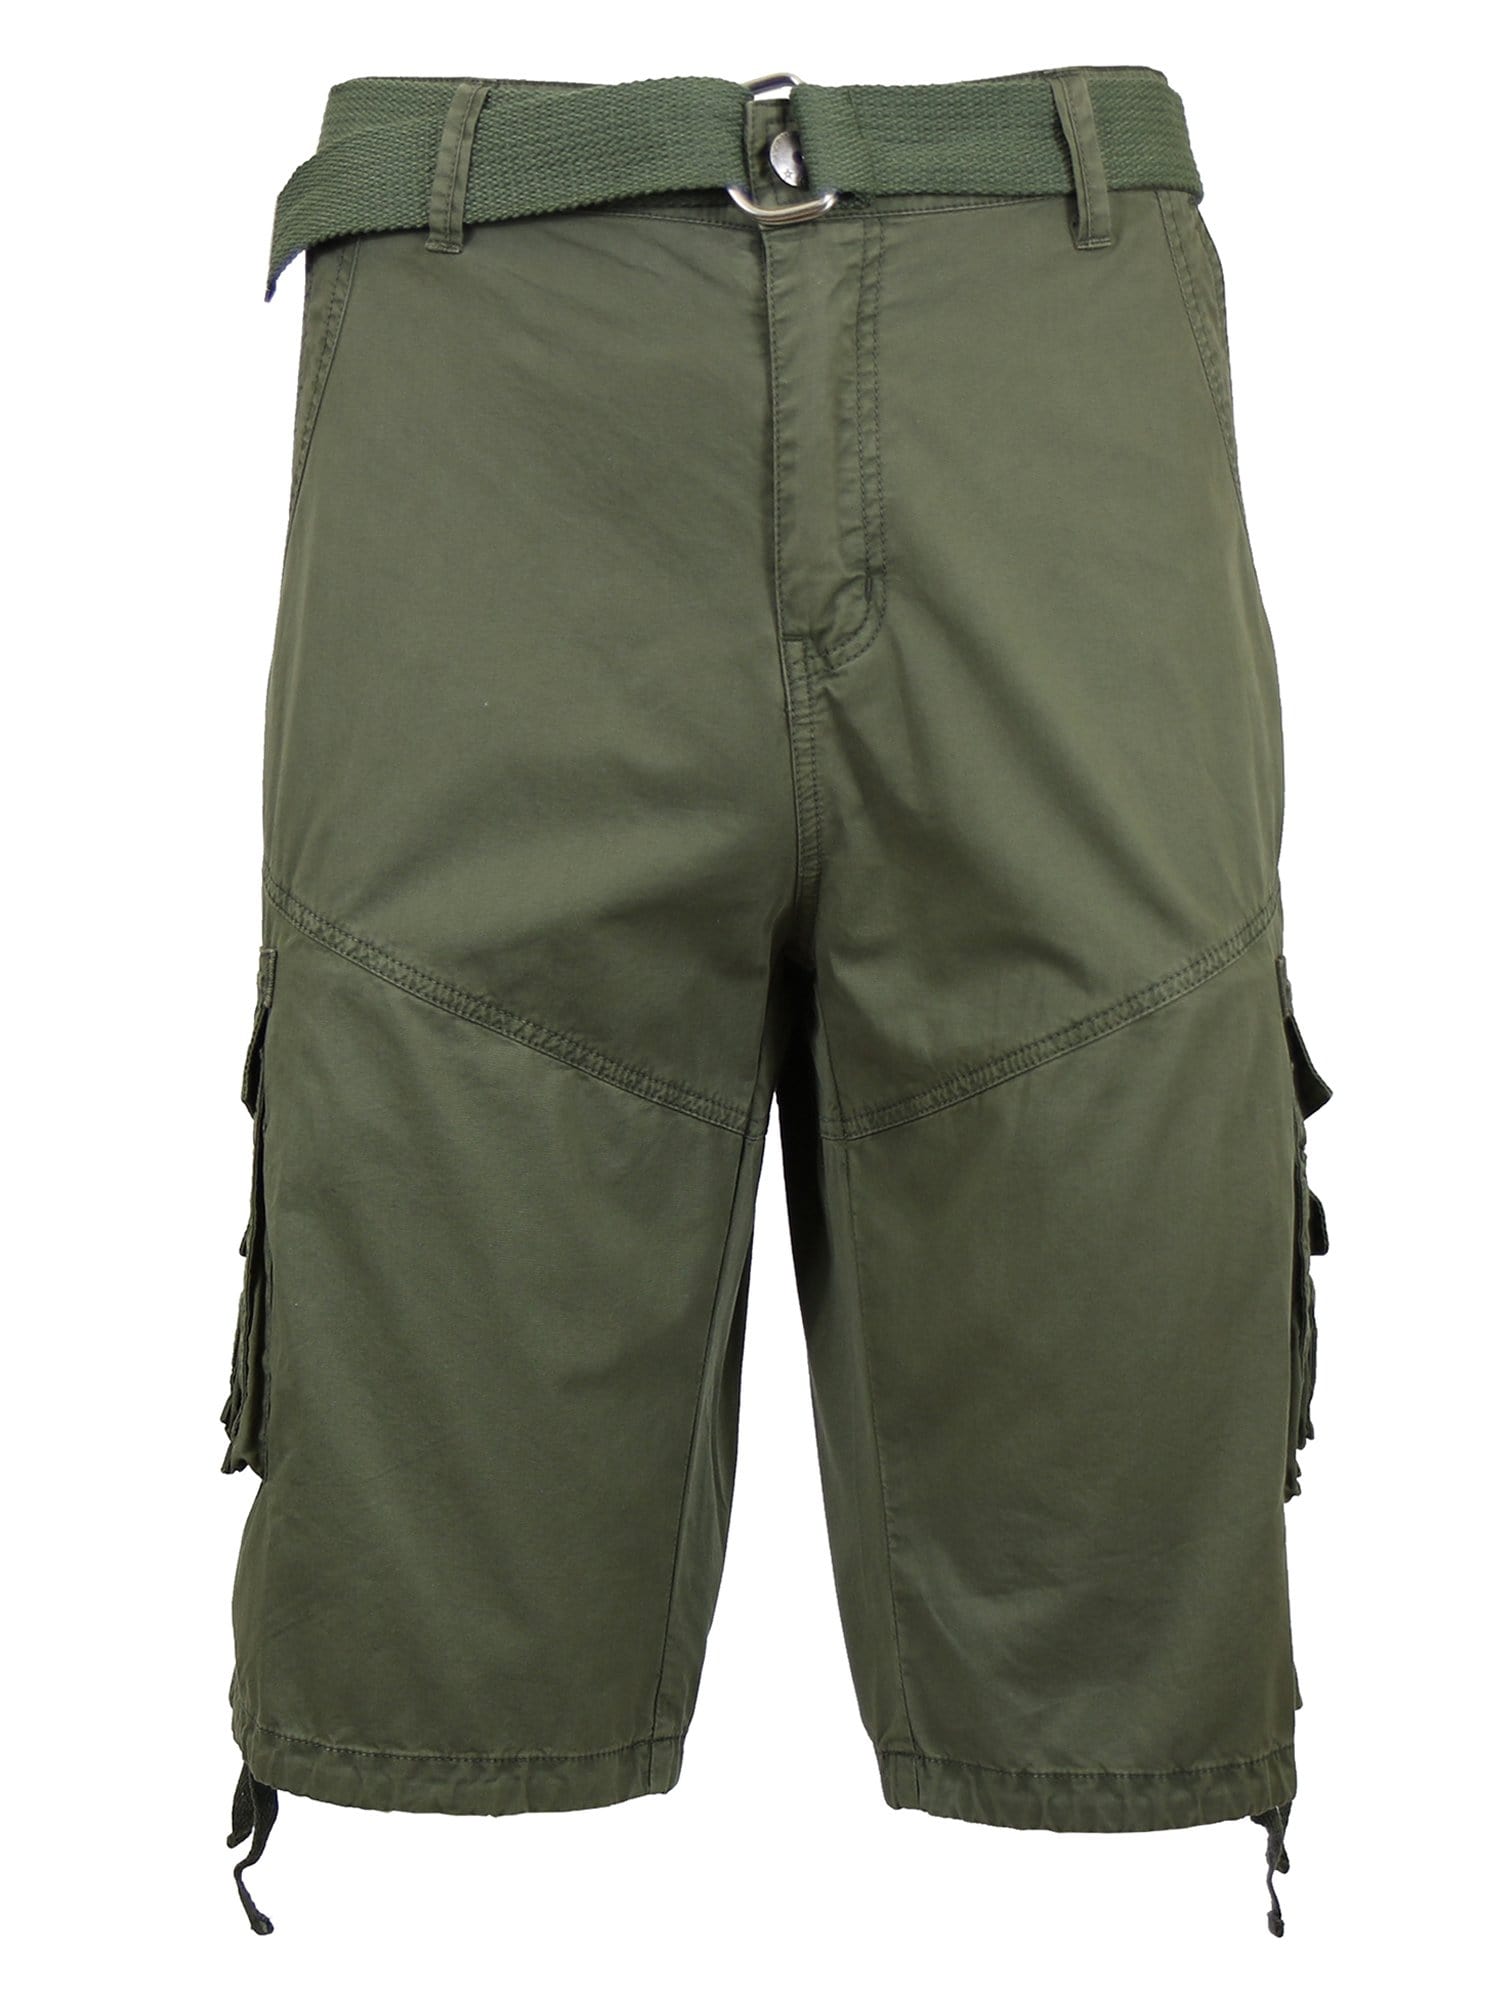 Men's Distressed Vintage Belted Cargo Utility Shorts - GalaxybyHarvic